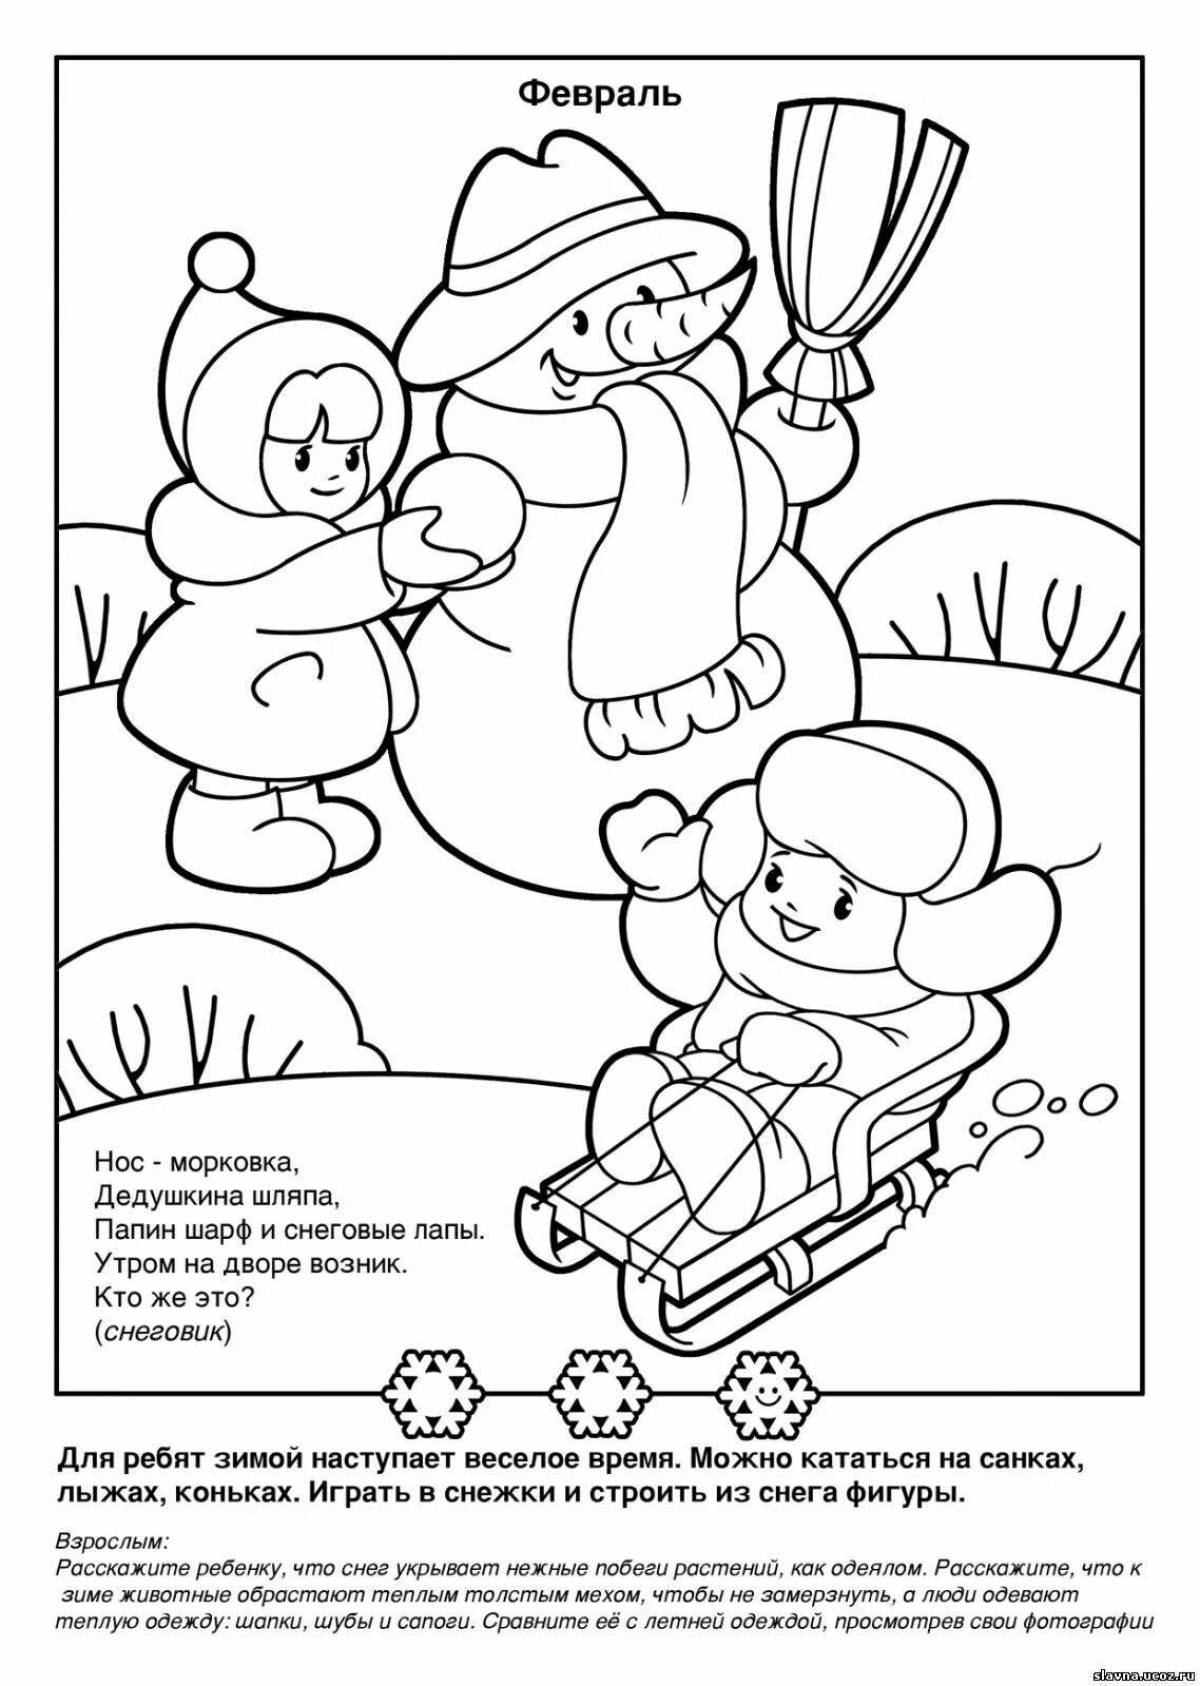 Magical February coloring book for kids